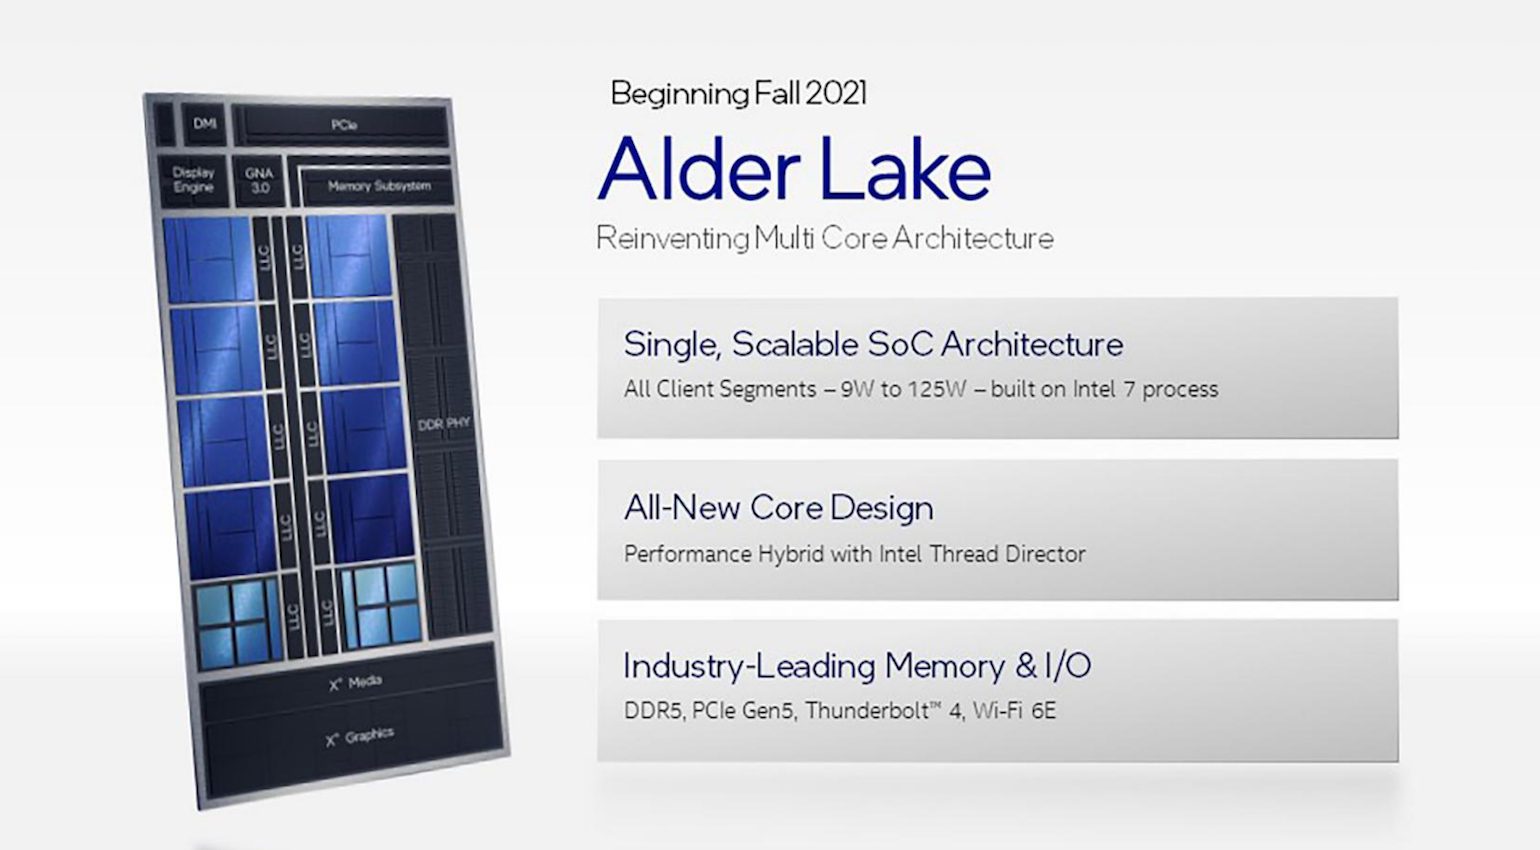 The Intel Alder Lake is coming this fall!